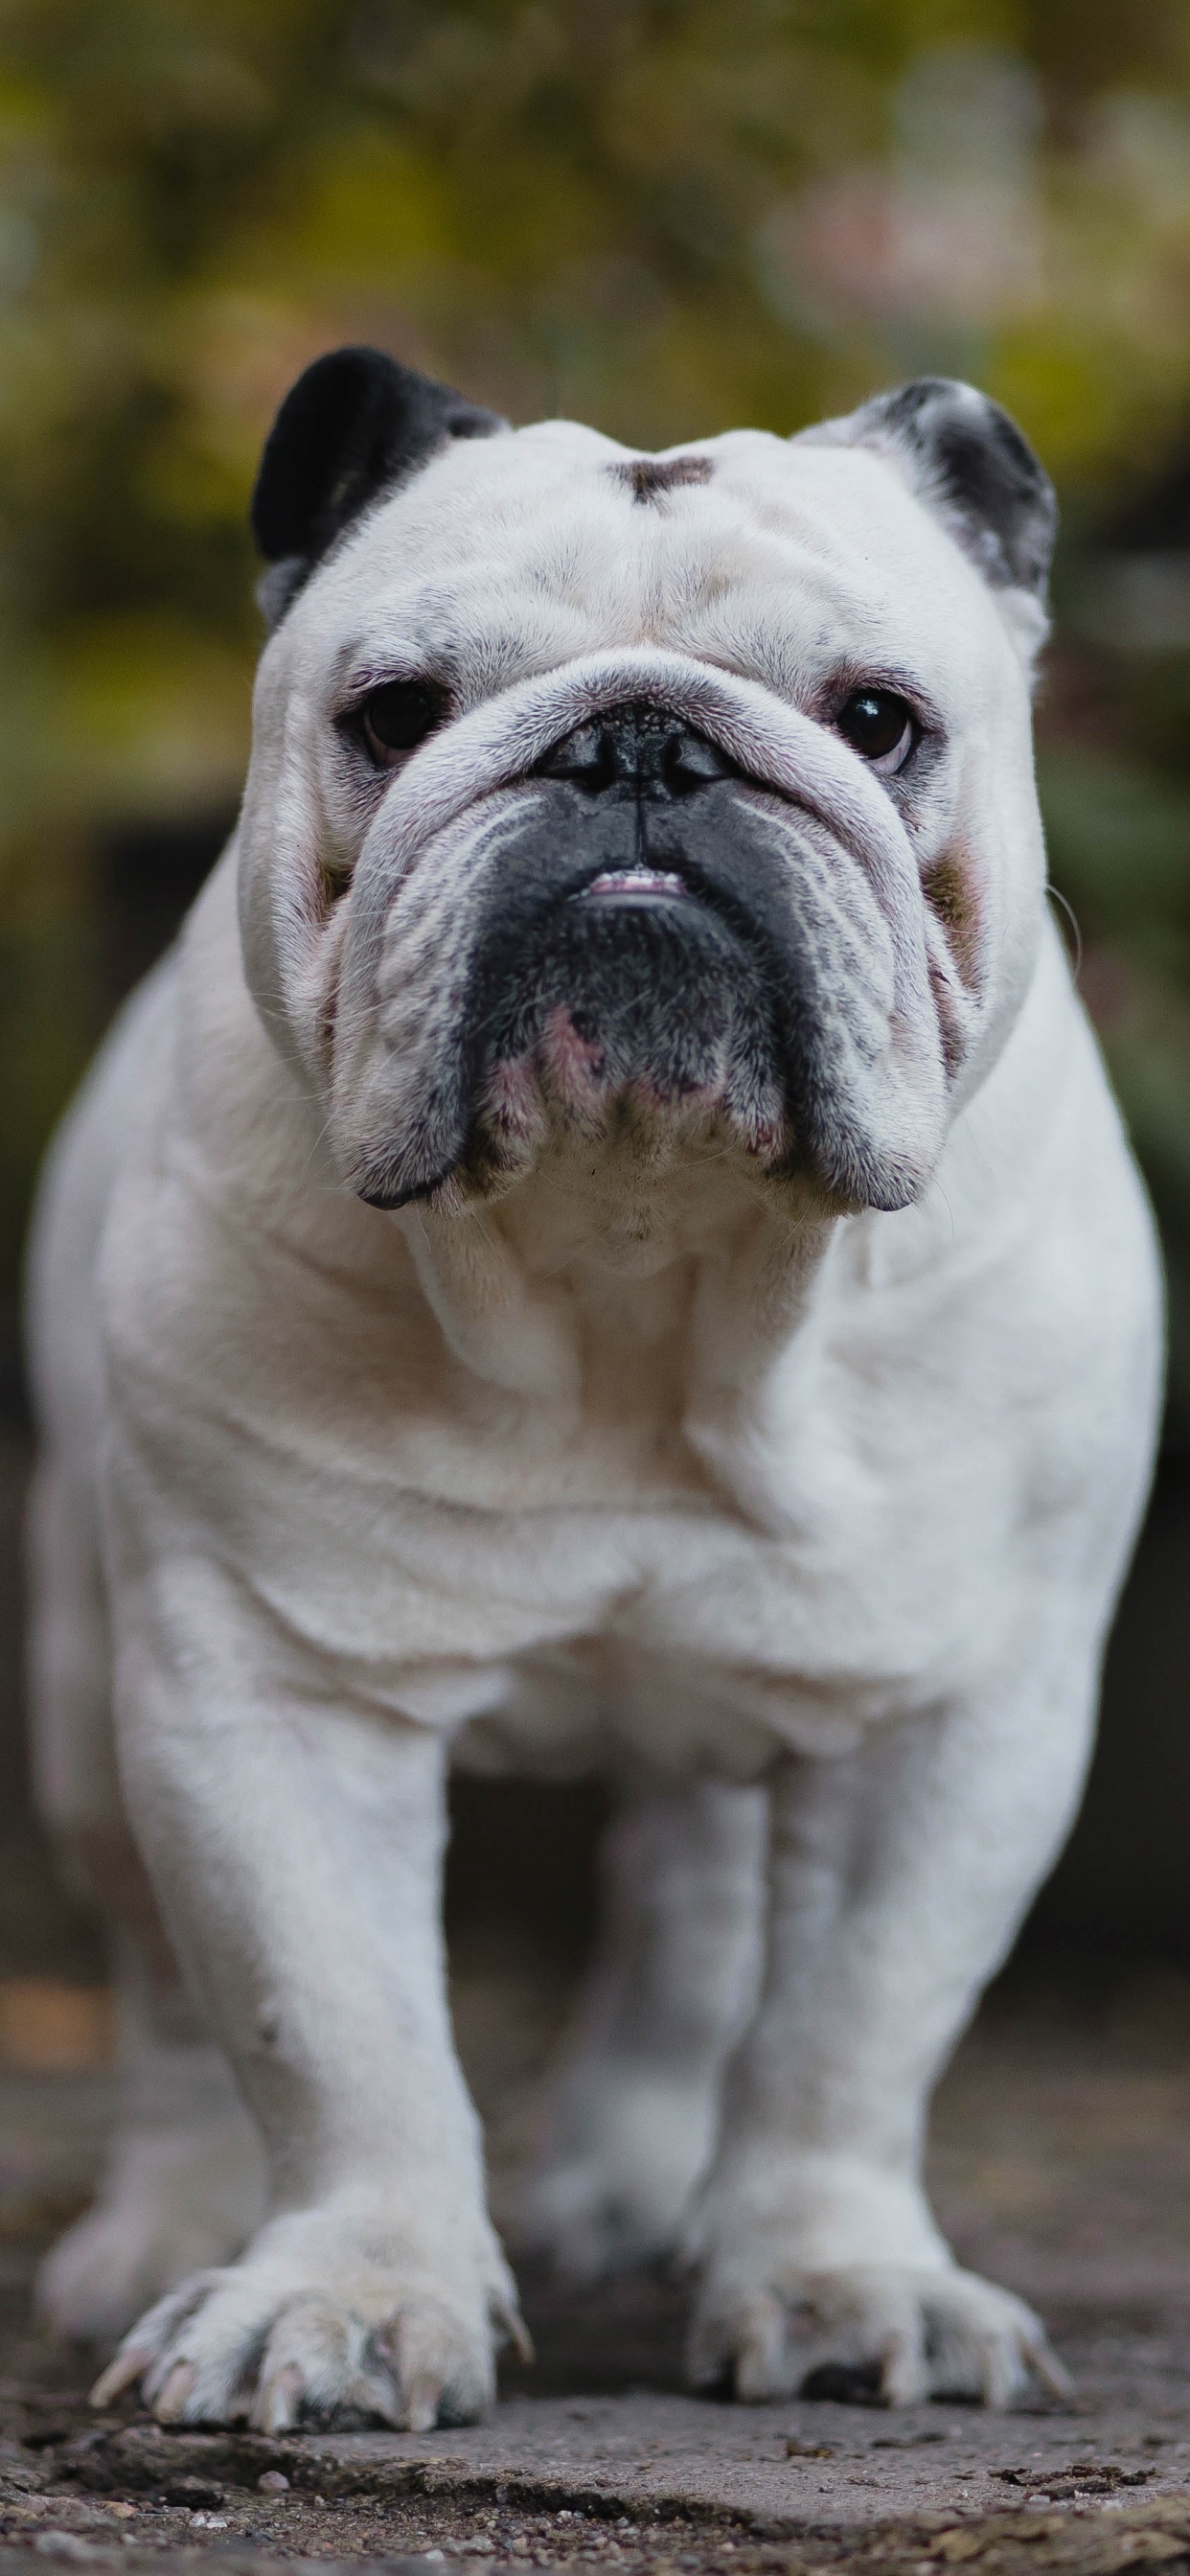 White and Brown English Bulldog Puppy on Brown Dirt. Wallpaper in 1242x2688 Resolution